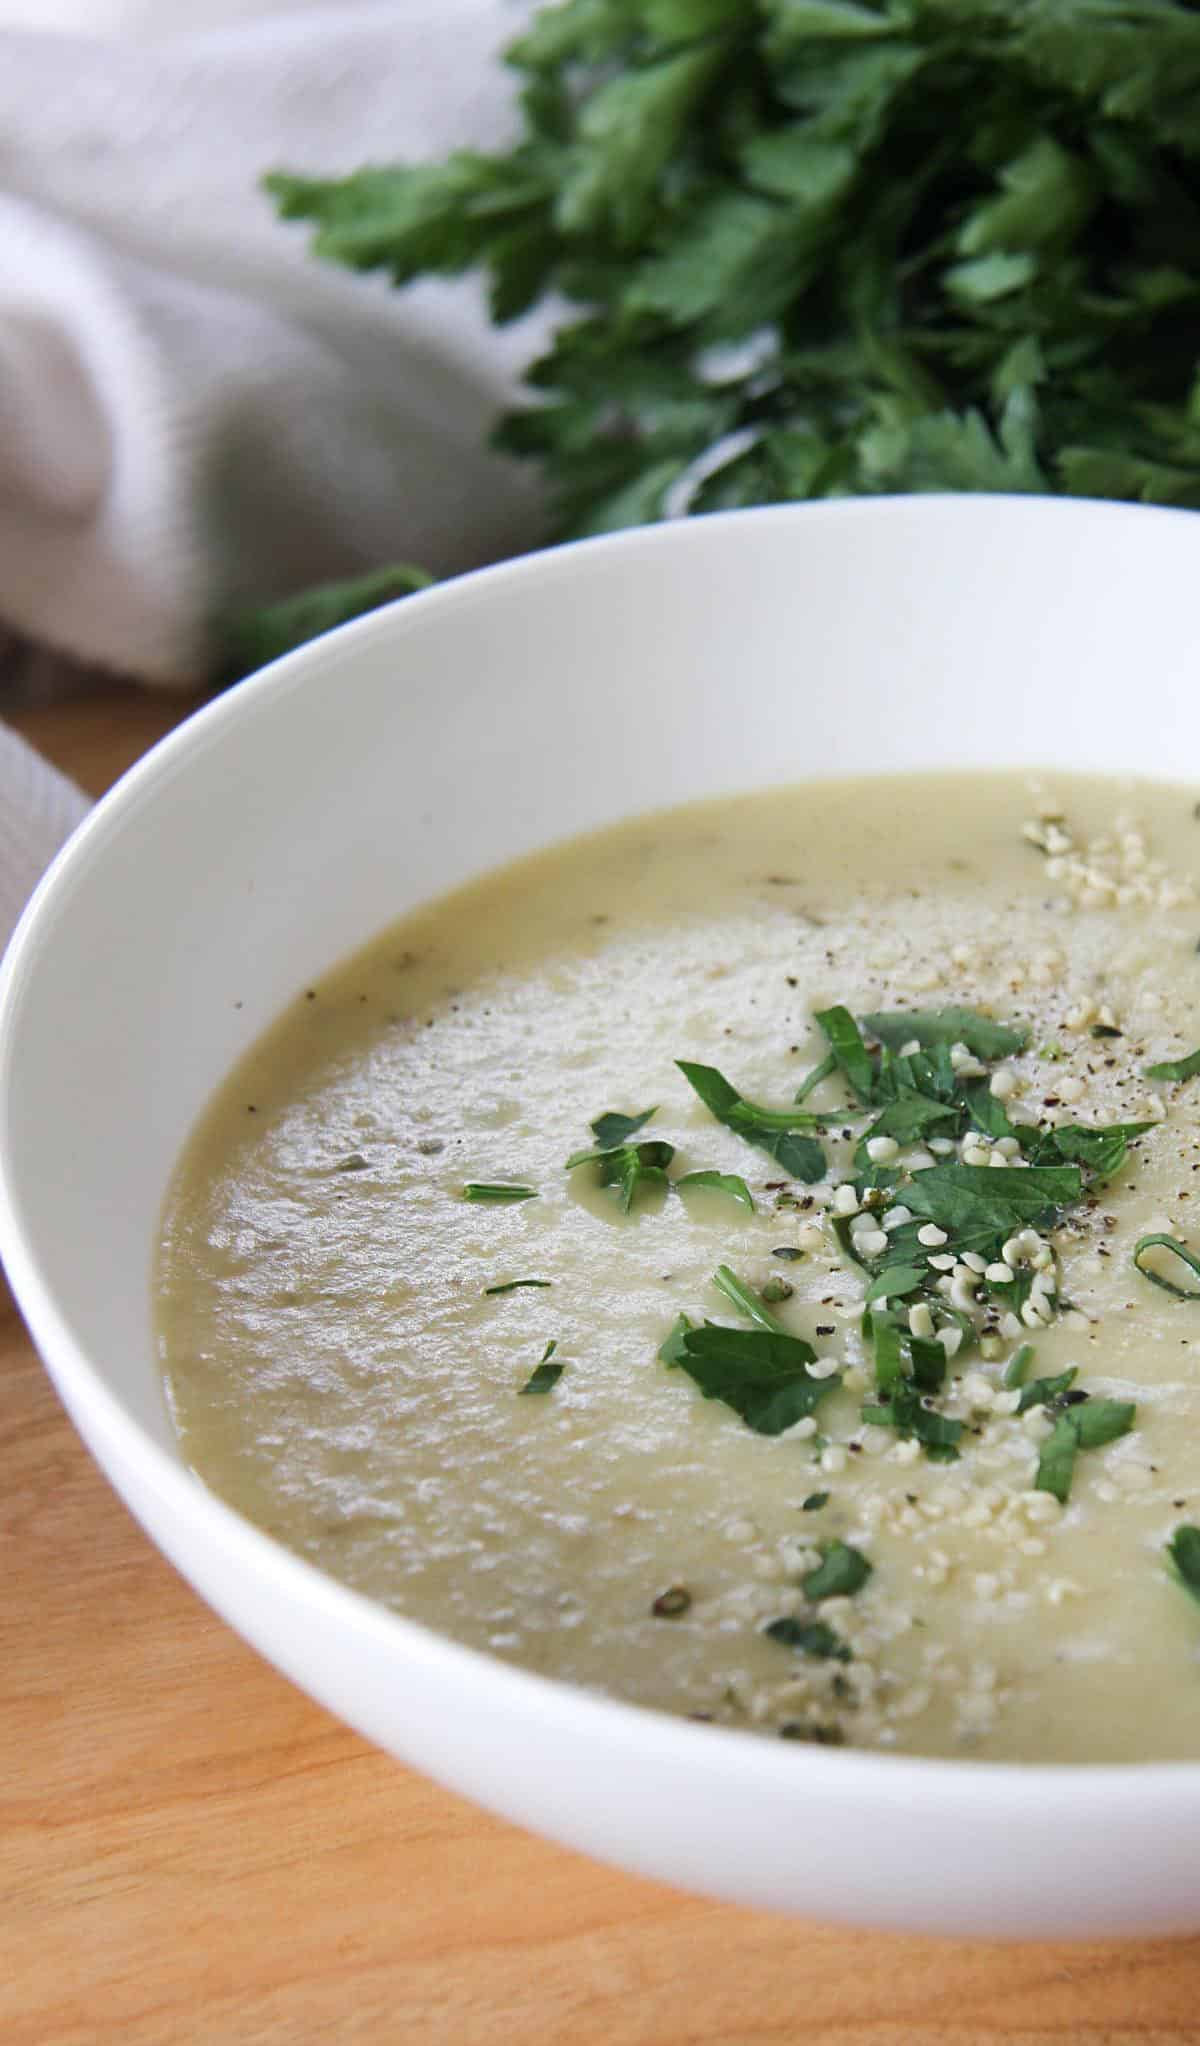  This soup is filled with healthy and hearty ingredients, making it a great option any time of year.